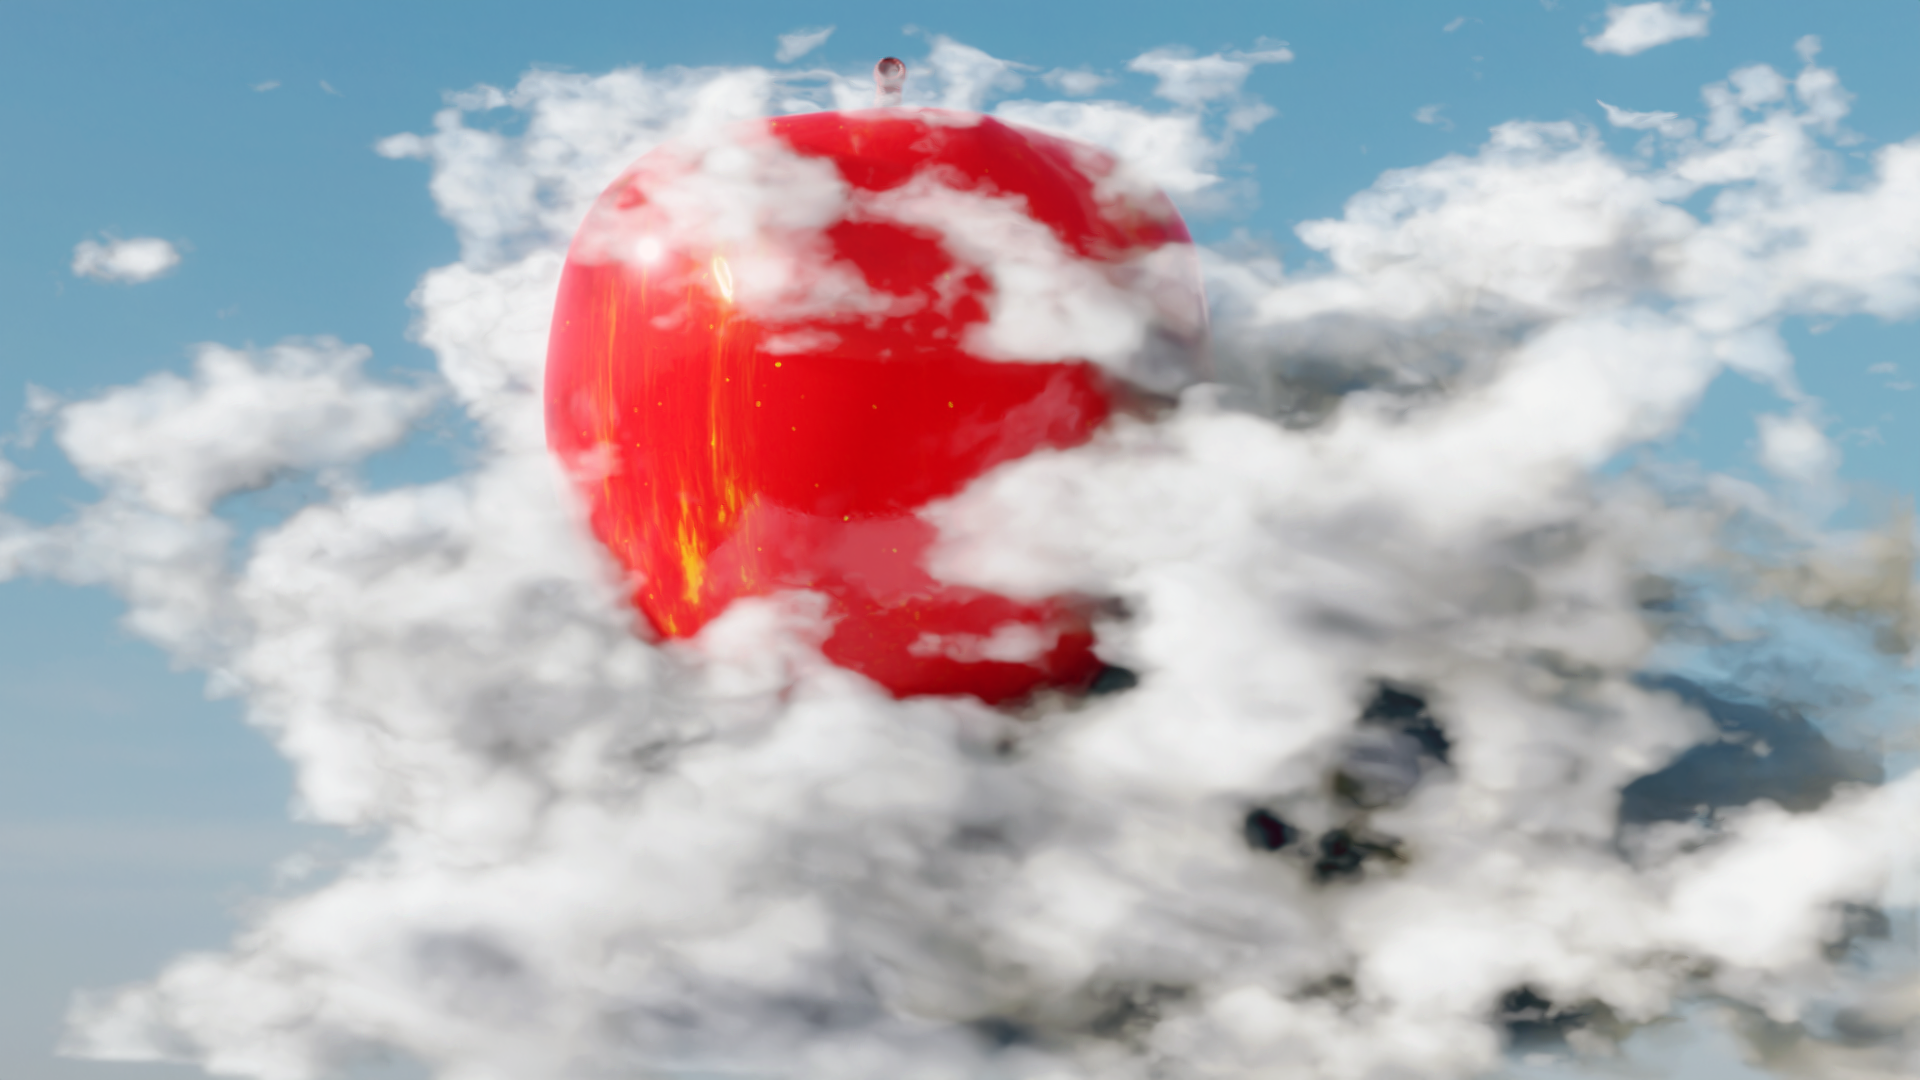 General 1920x1080 red apple clouds Blender CGI 3D Abstract abstract fruit sky digital art